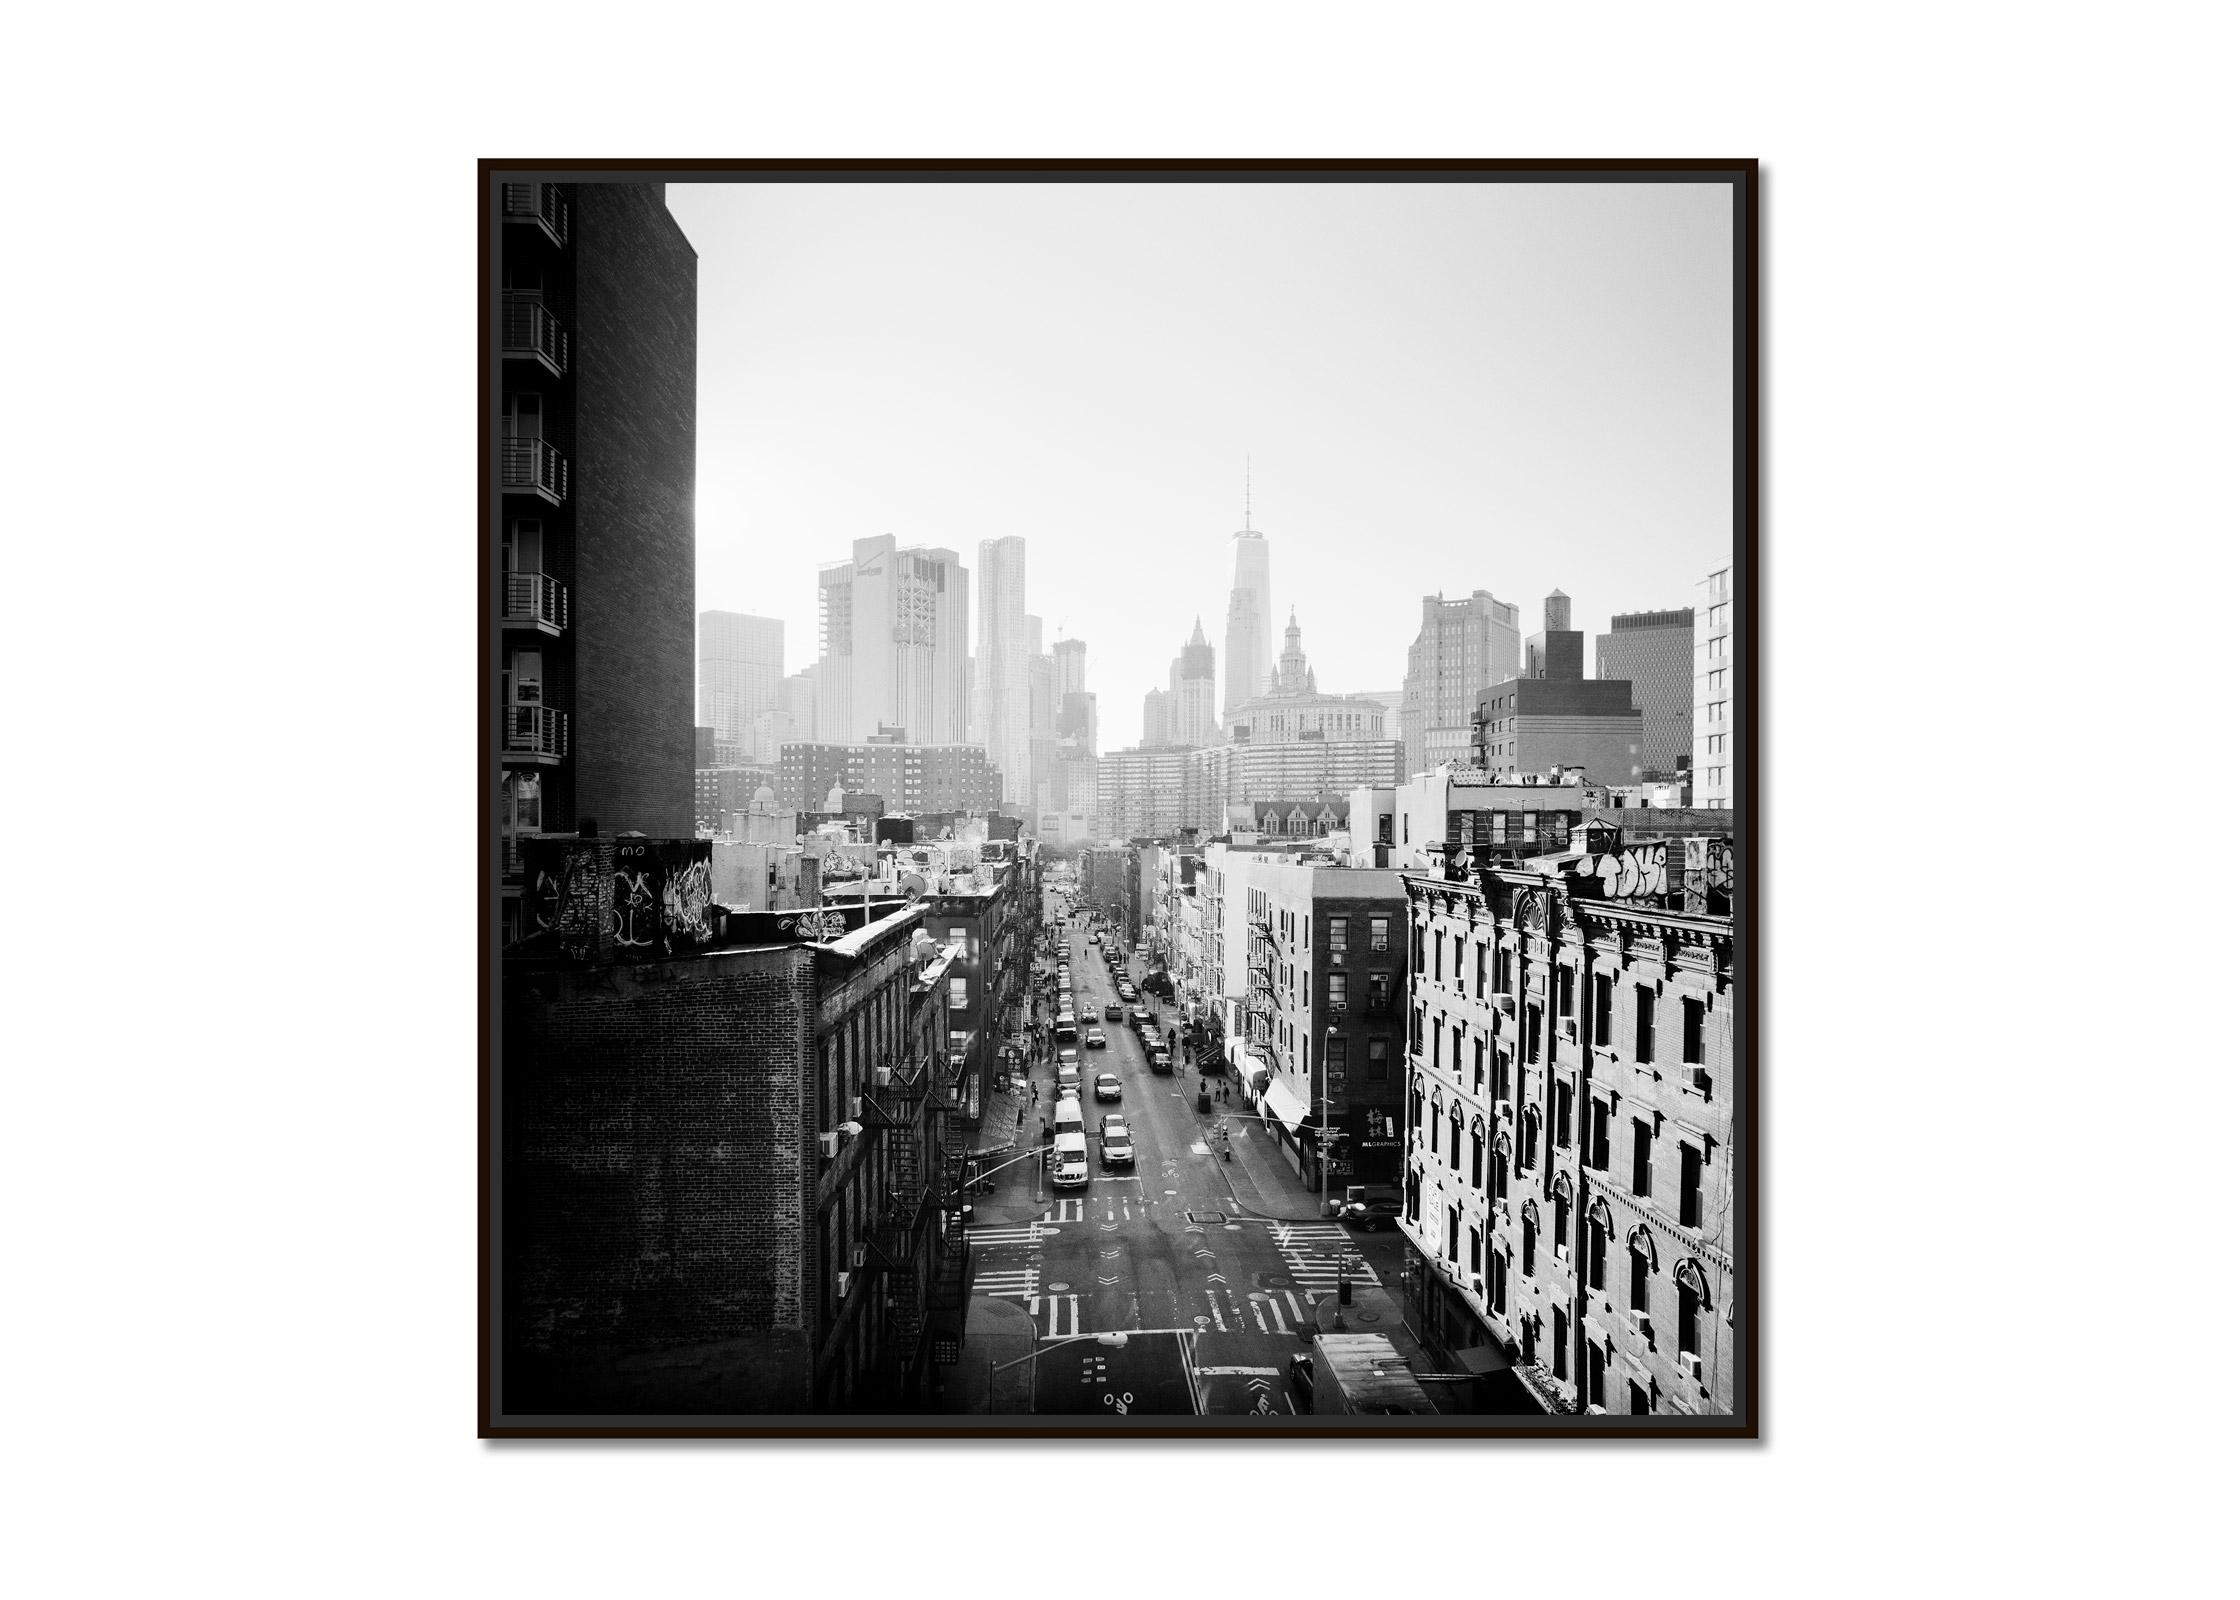 Chinatown Skyline New York City USA black and white cityscape art photography - Photograph by Gerald Berghammer